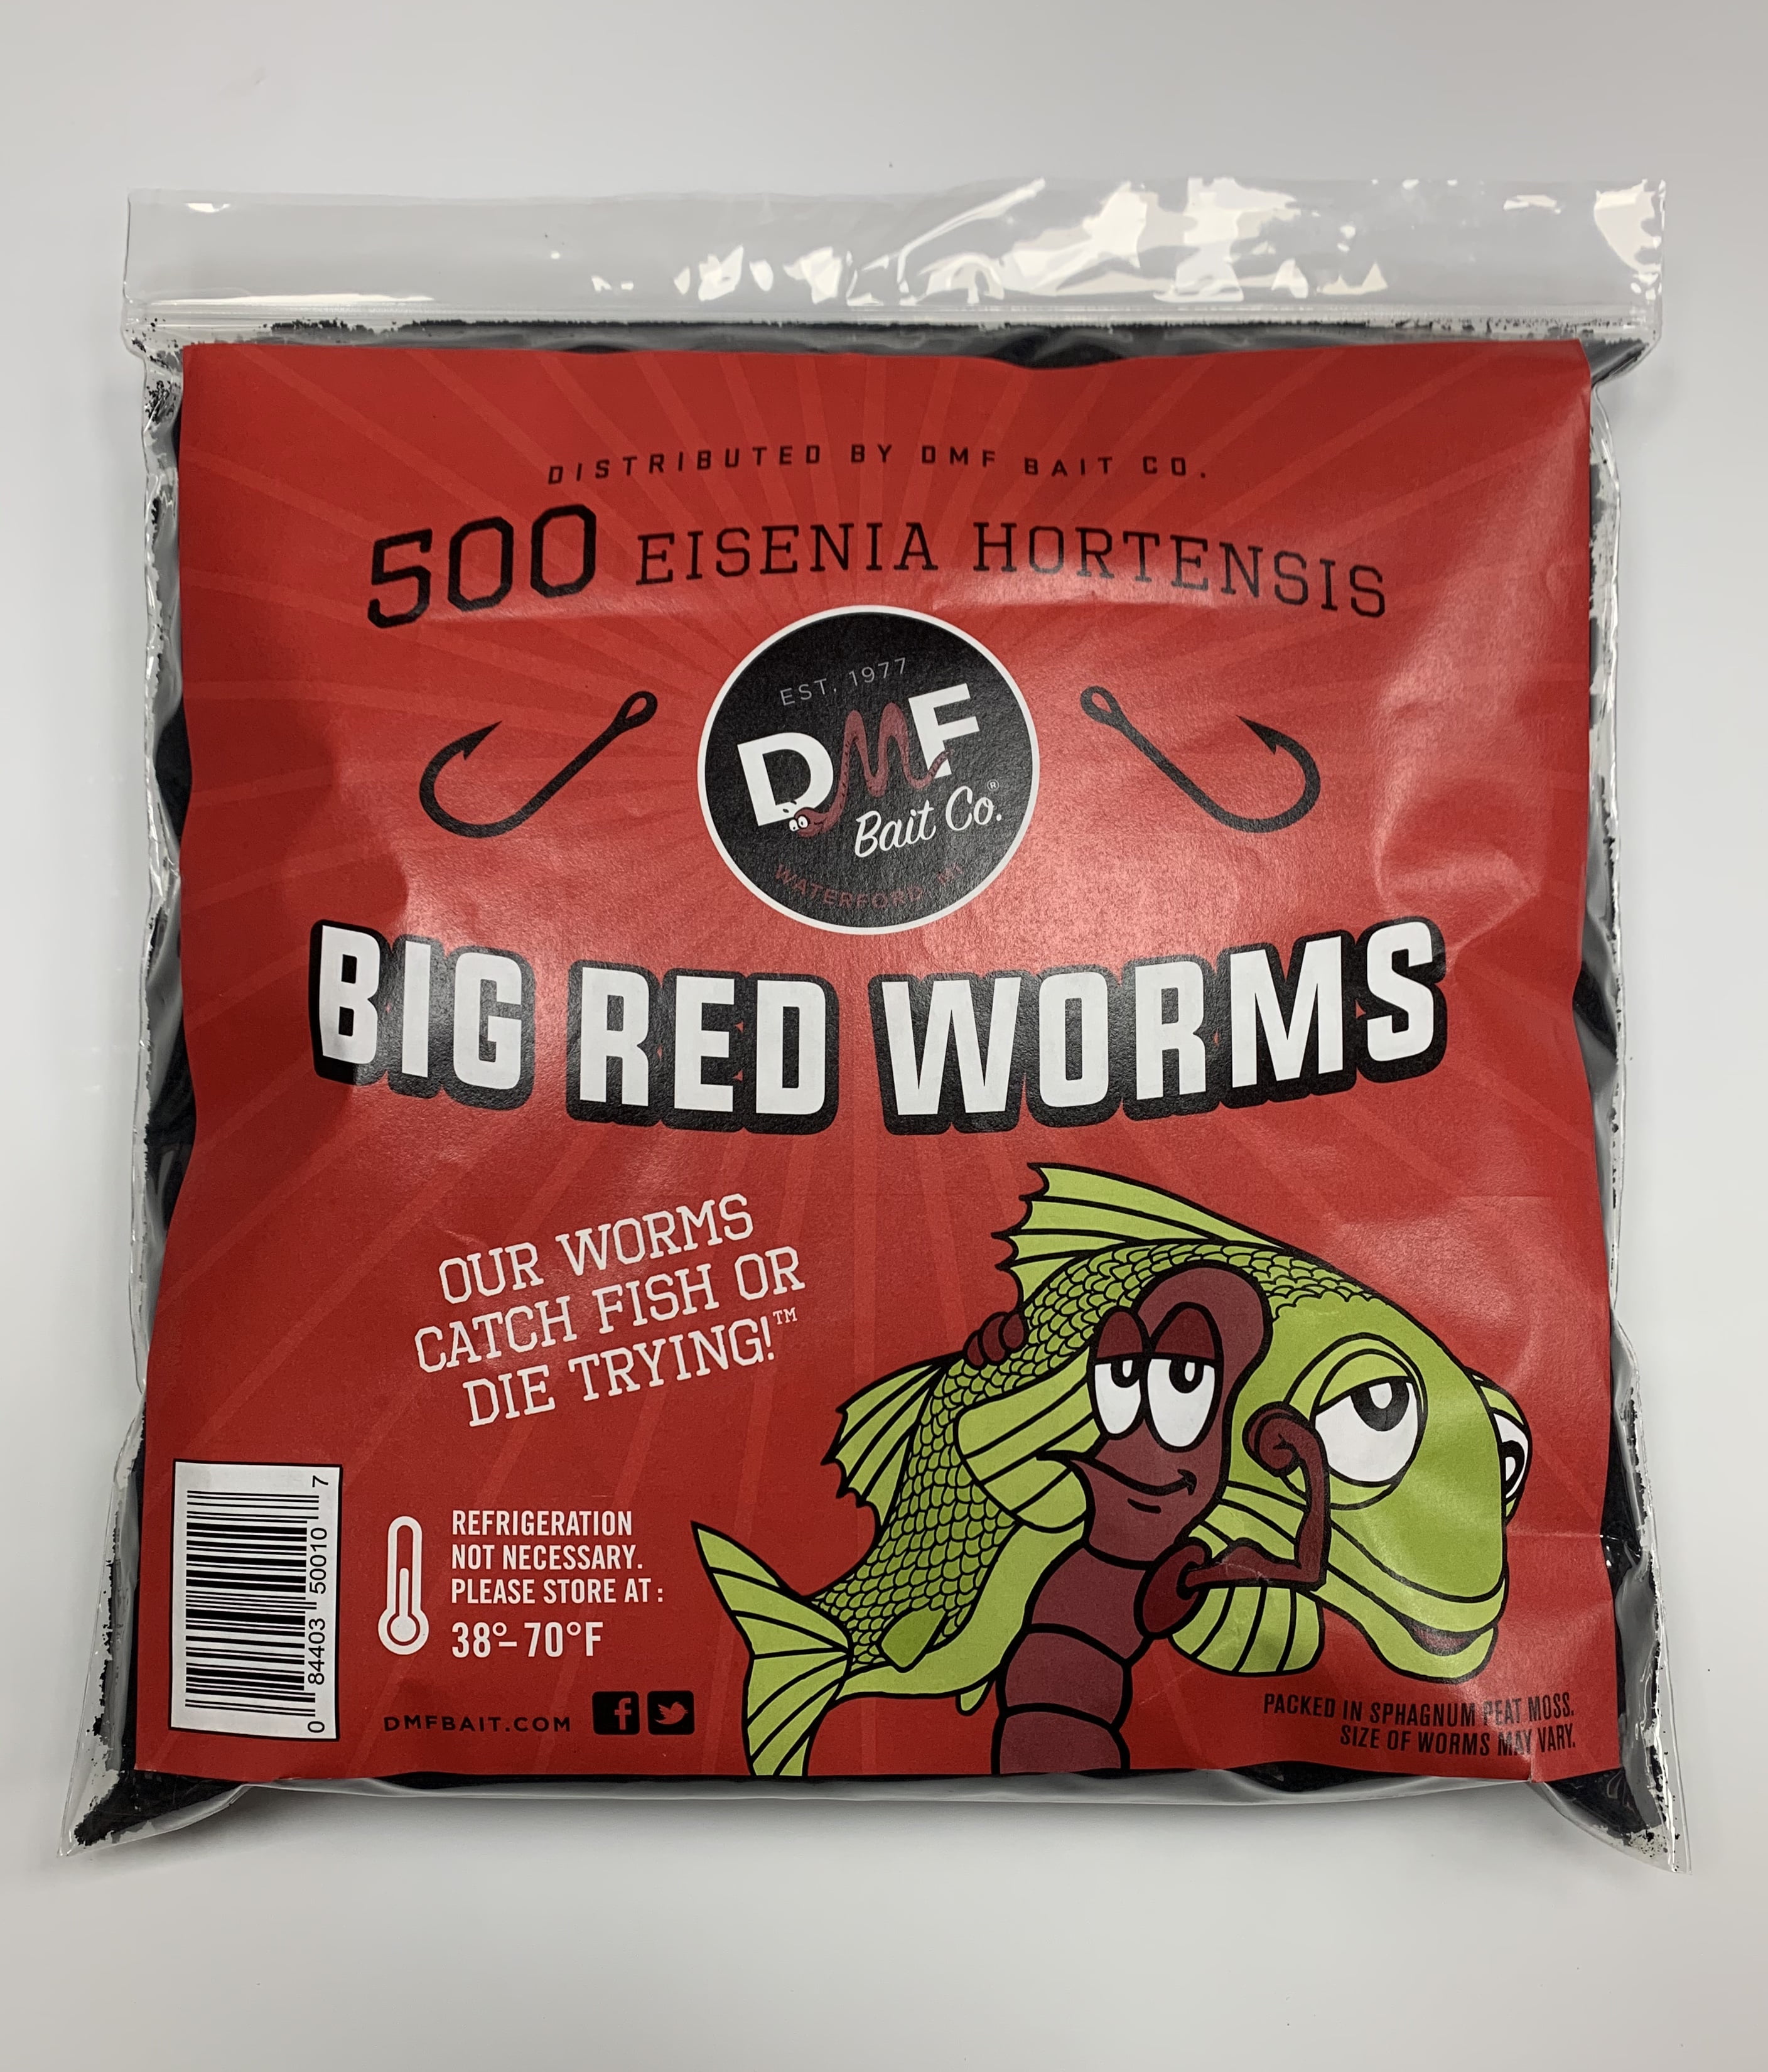 DMF Bait Co. Live Red Worms in Reusable Cooler, 500 Ct 